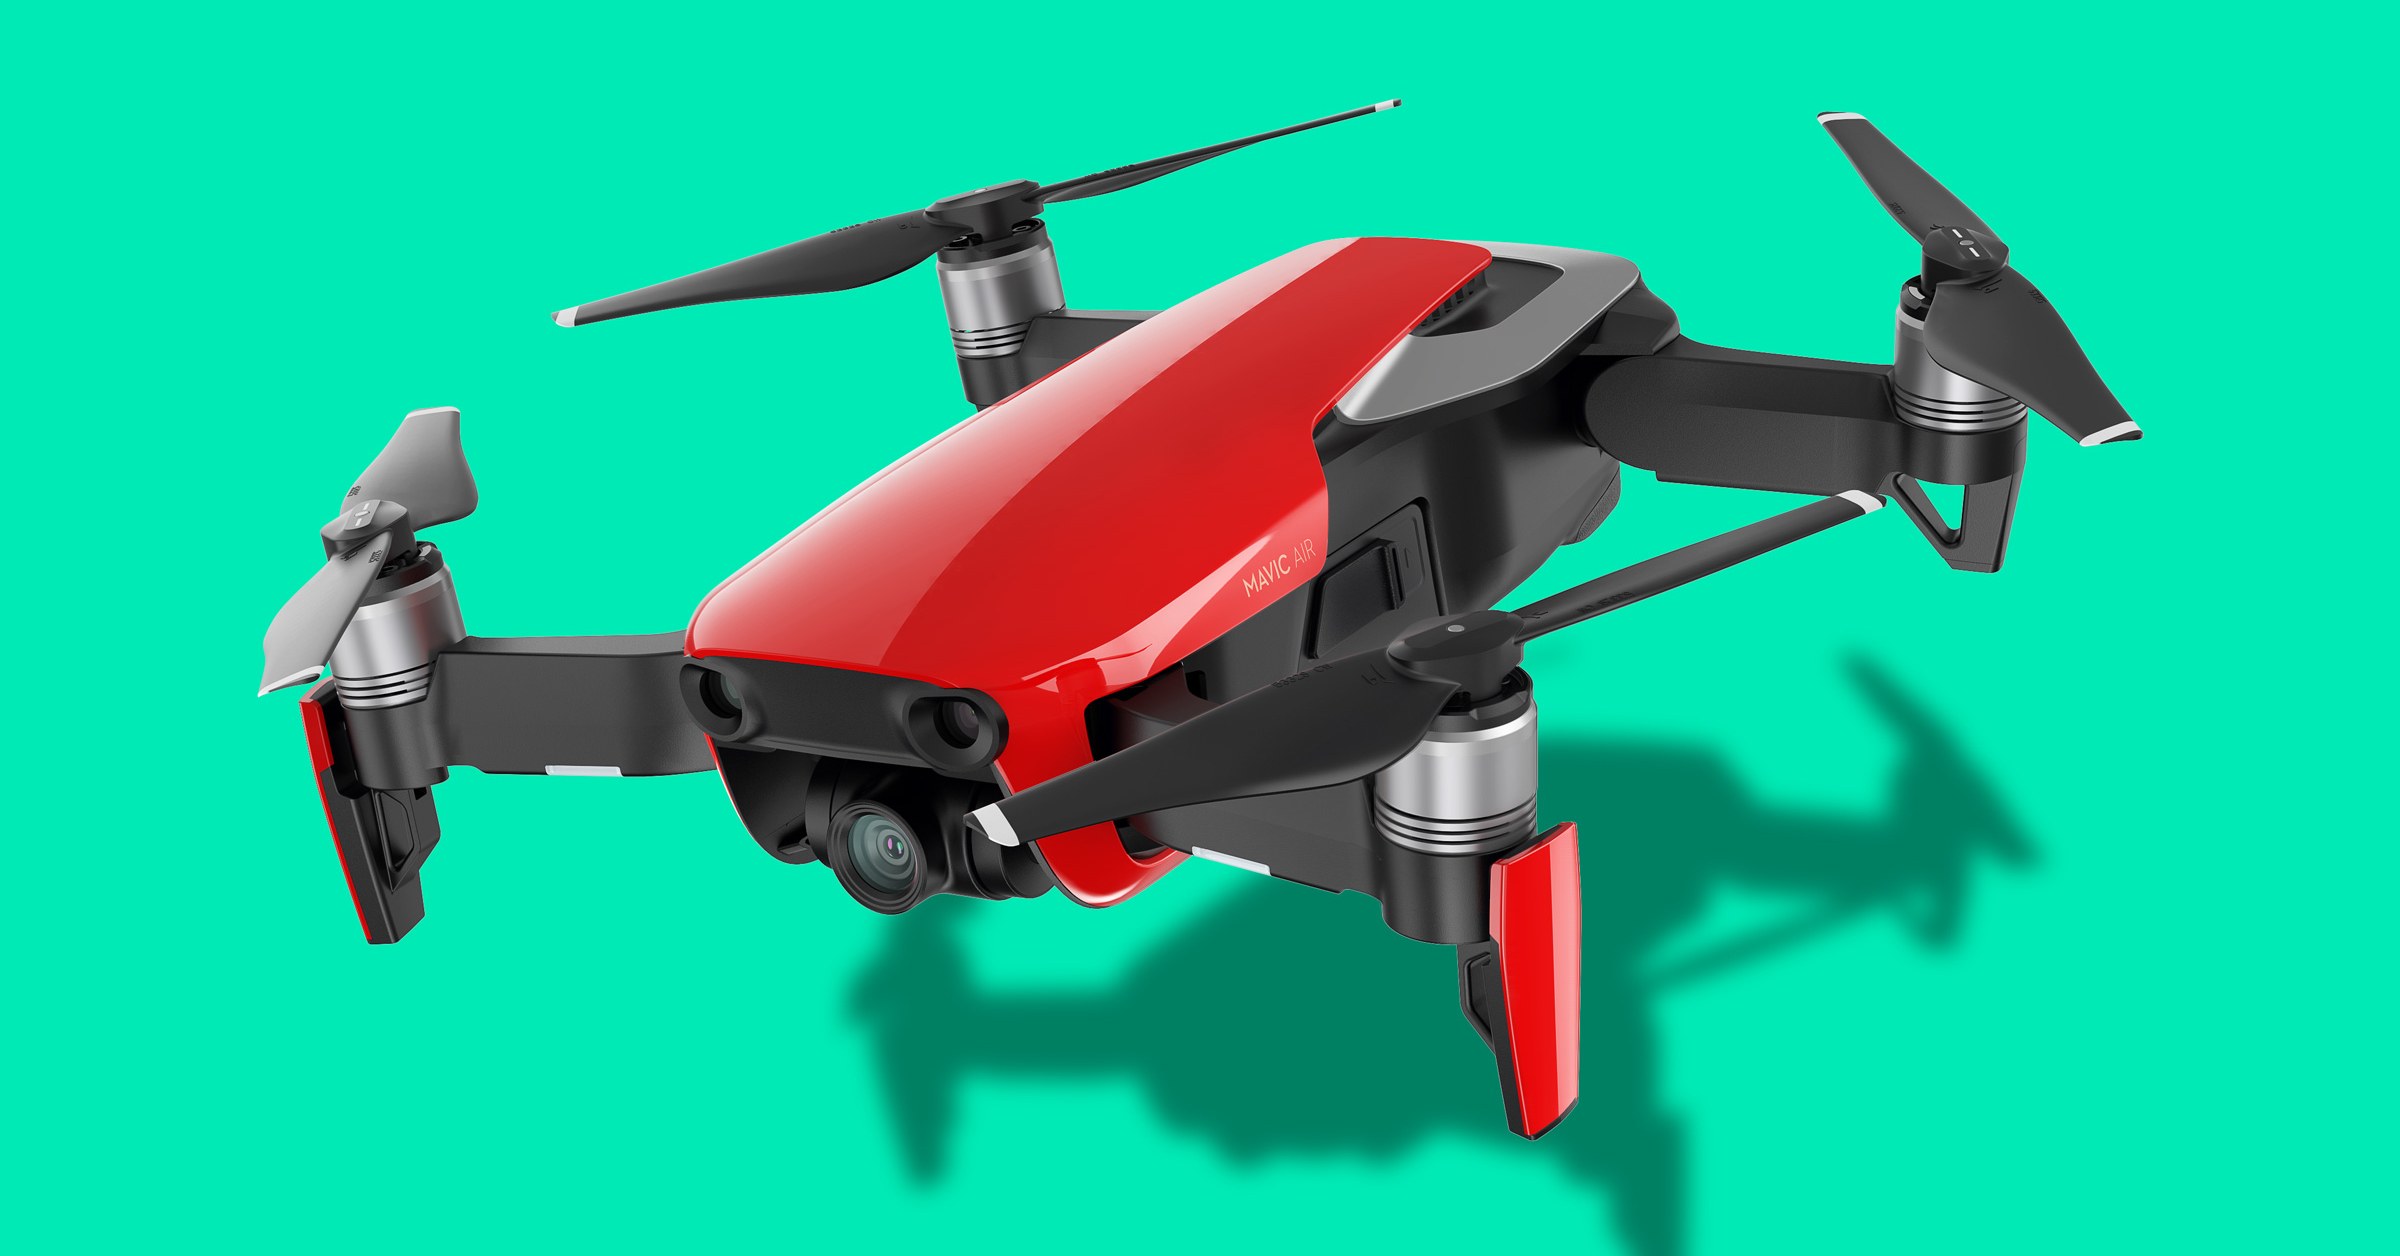 Drone Software Market Global Trend 2019, Worldwide Research News and Emerging Growth Opportunity 2025